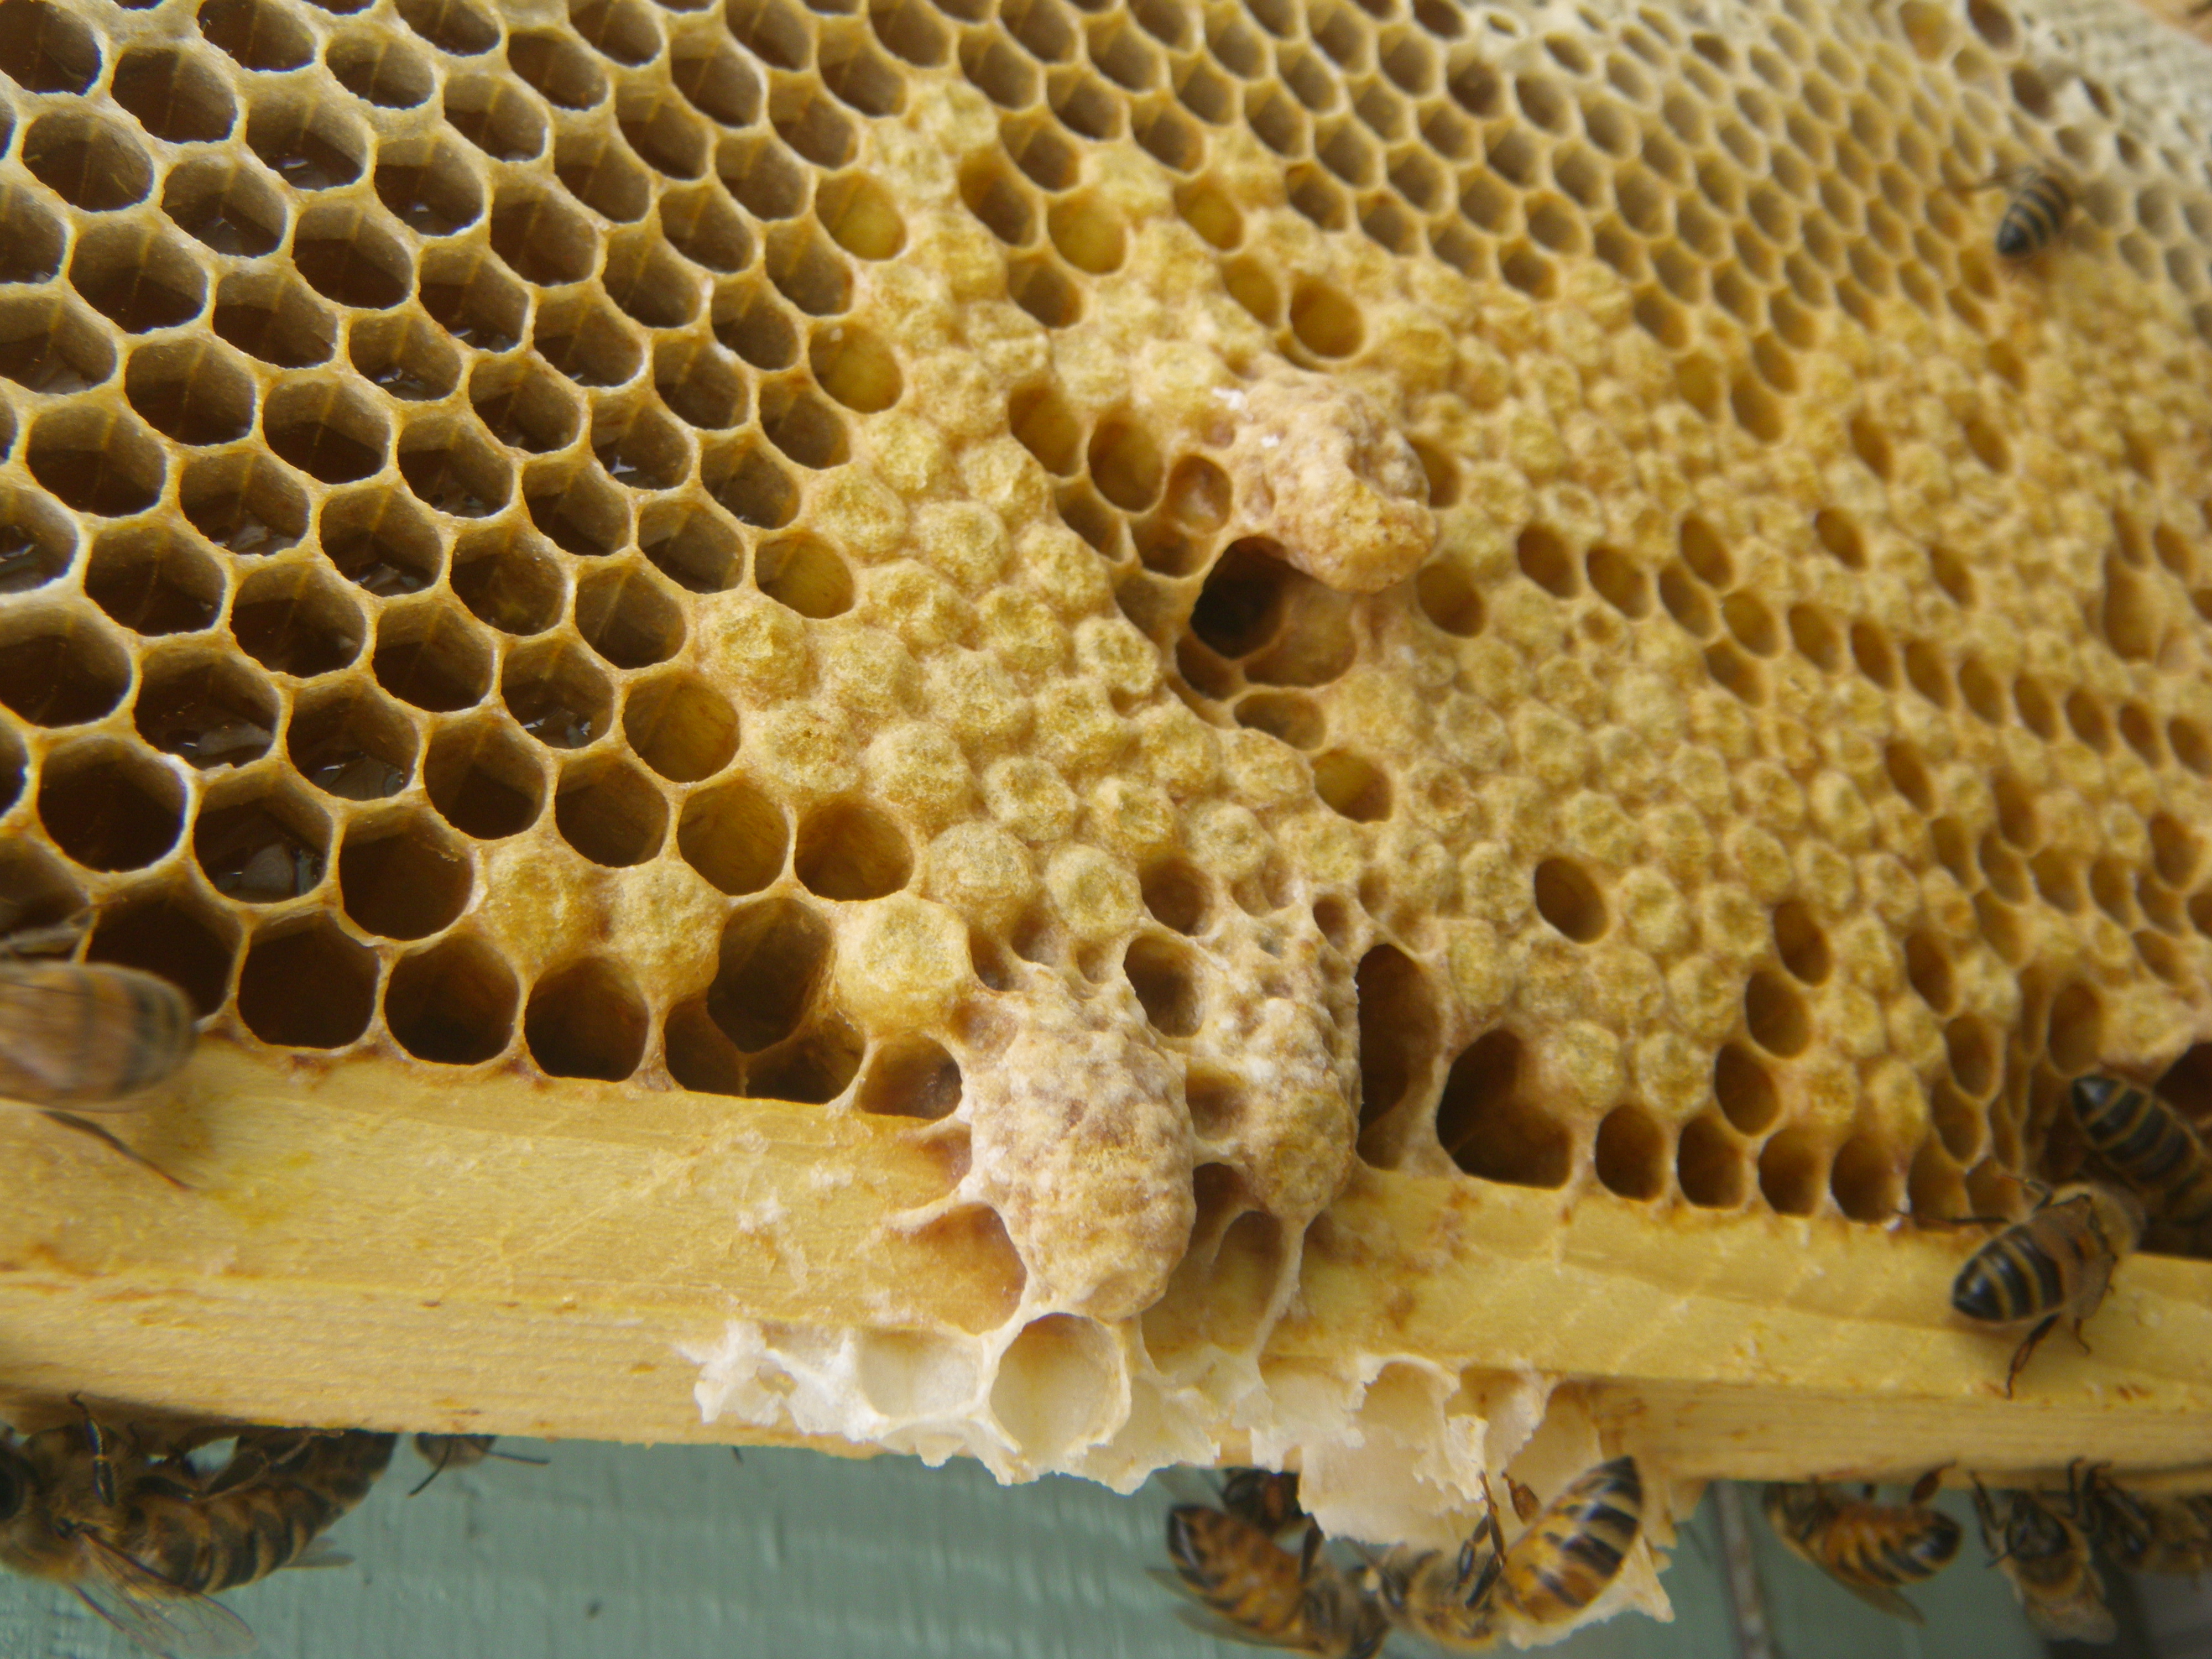 By shawn caza @ beekeeping.isgood.ca (Own work) [CC BY-SA 3.0 (https://creativecommons.org/licenses/by-sa/3.0)], via Wikimedia Commons